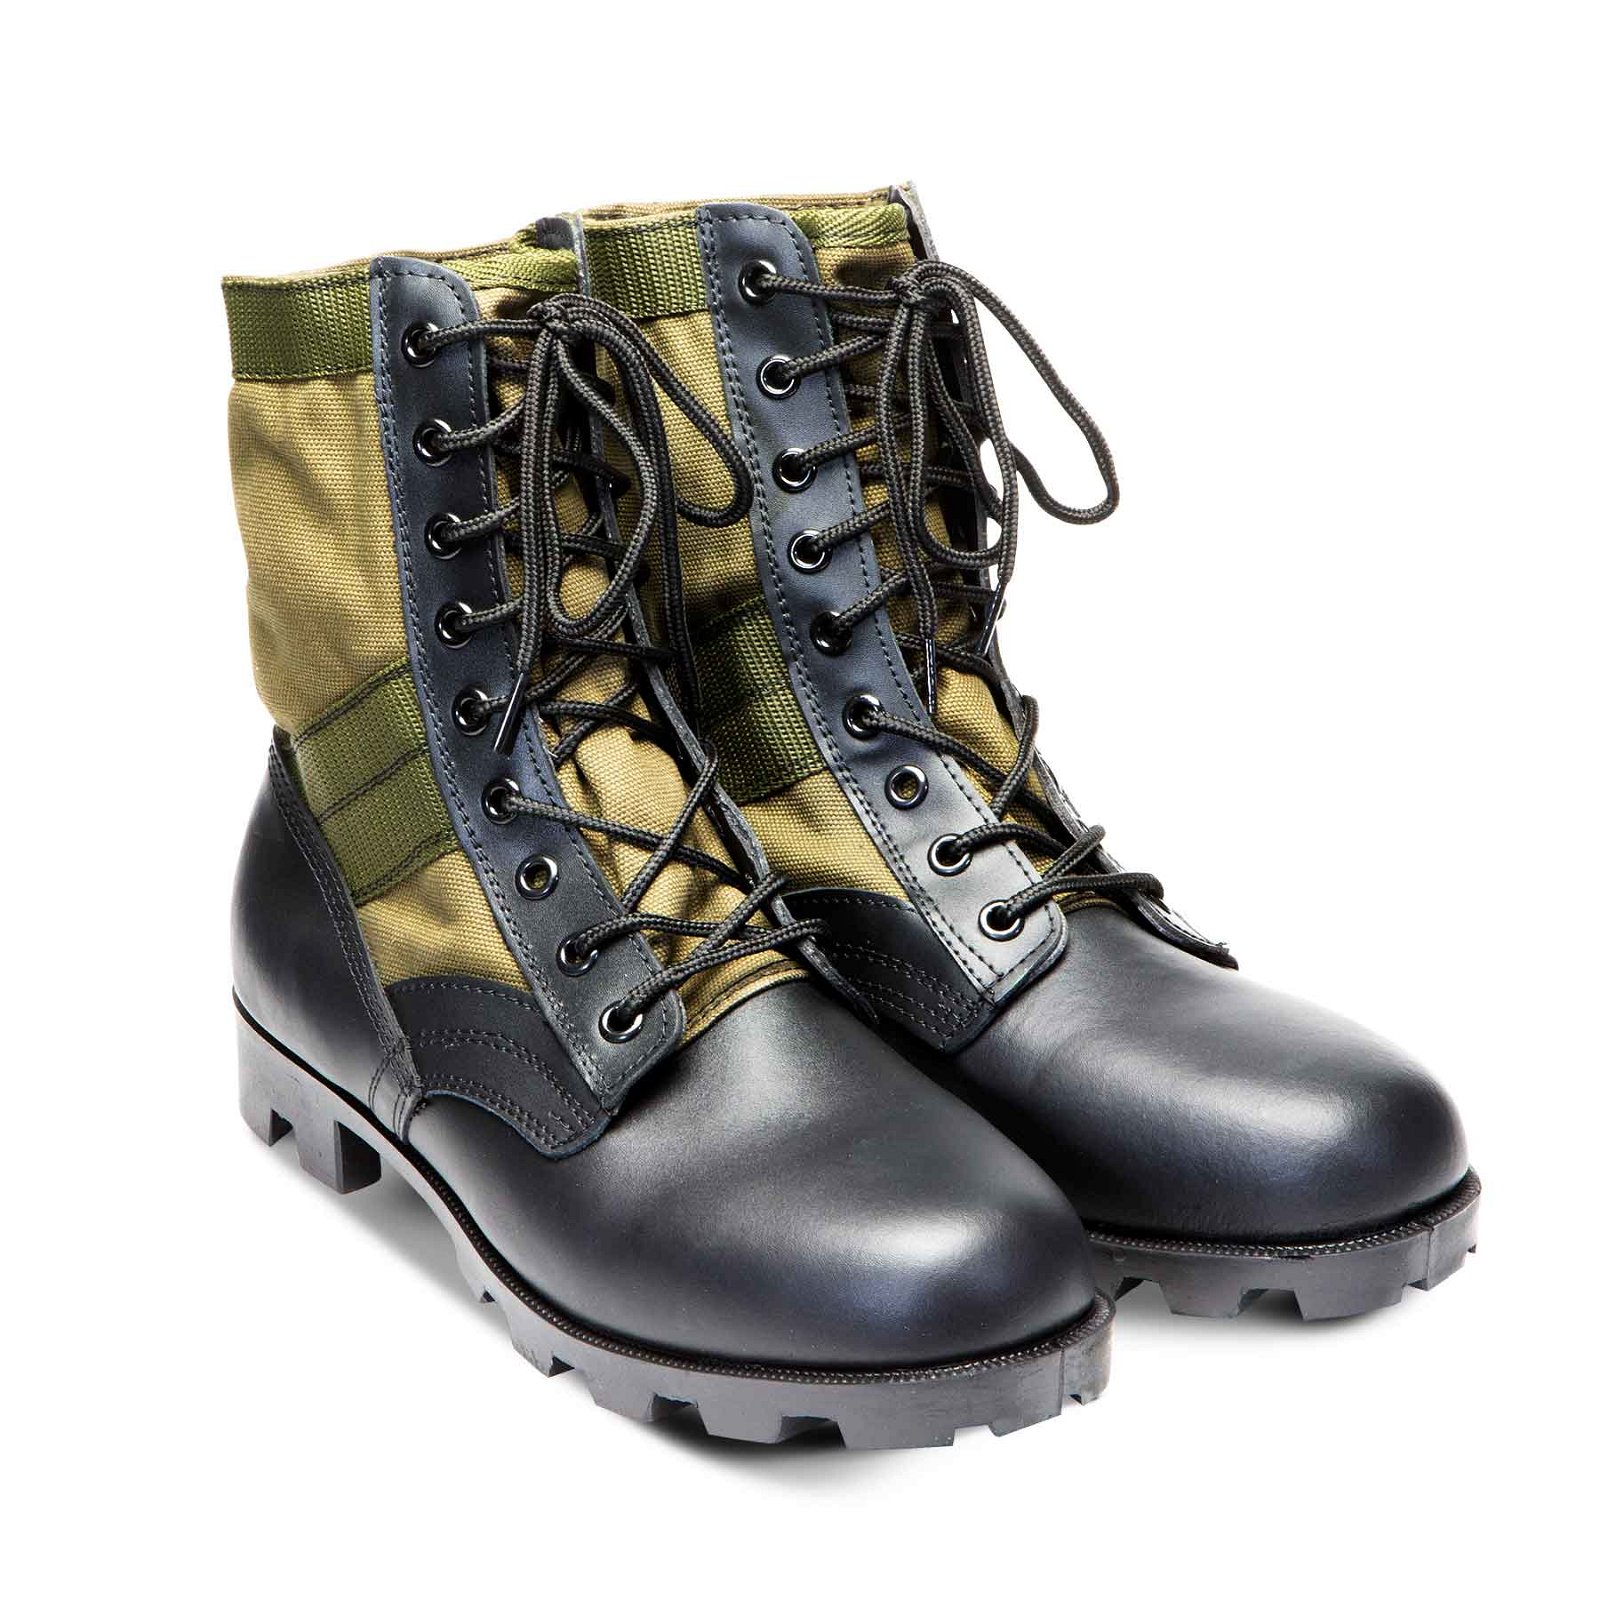 Image of OD Green Jungle Boots